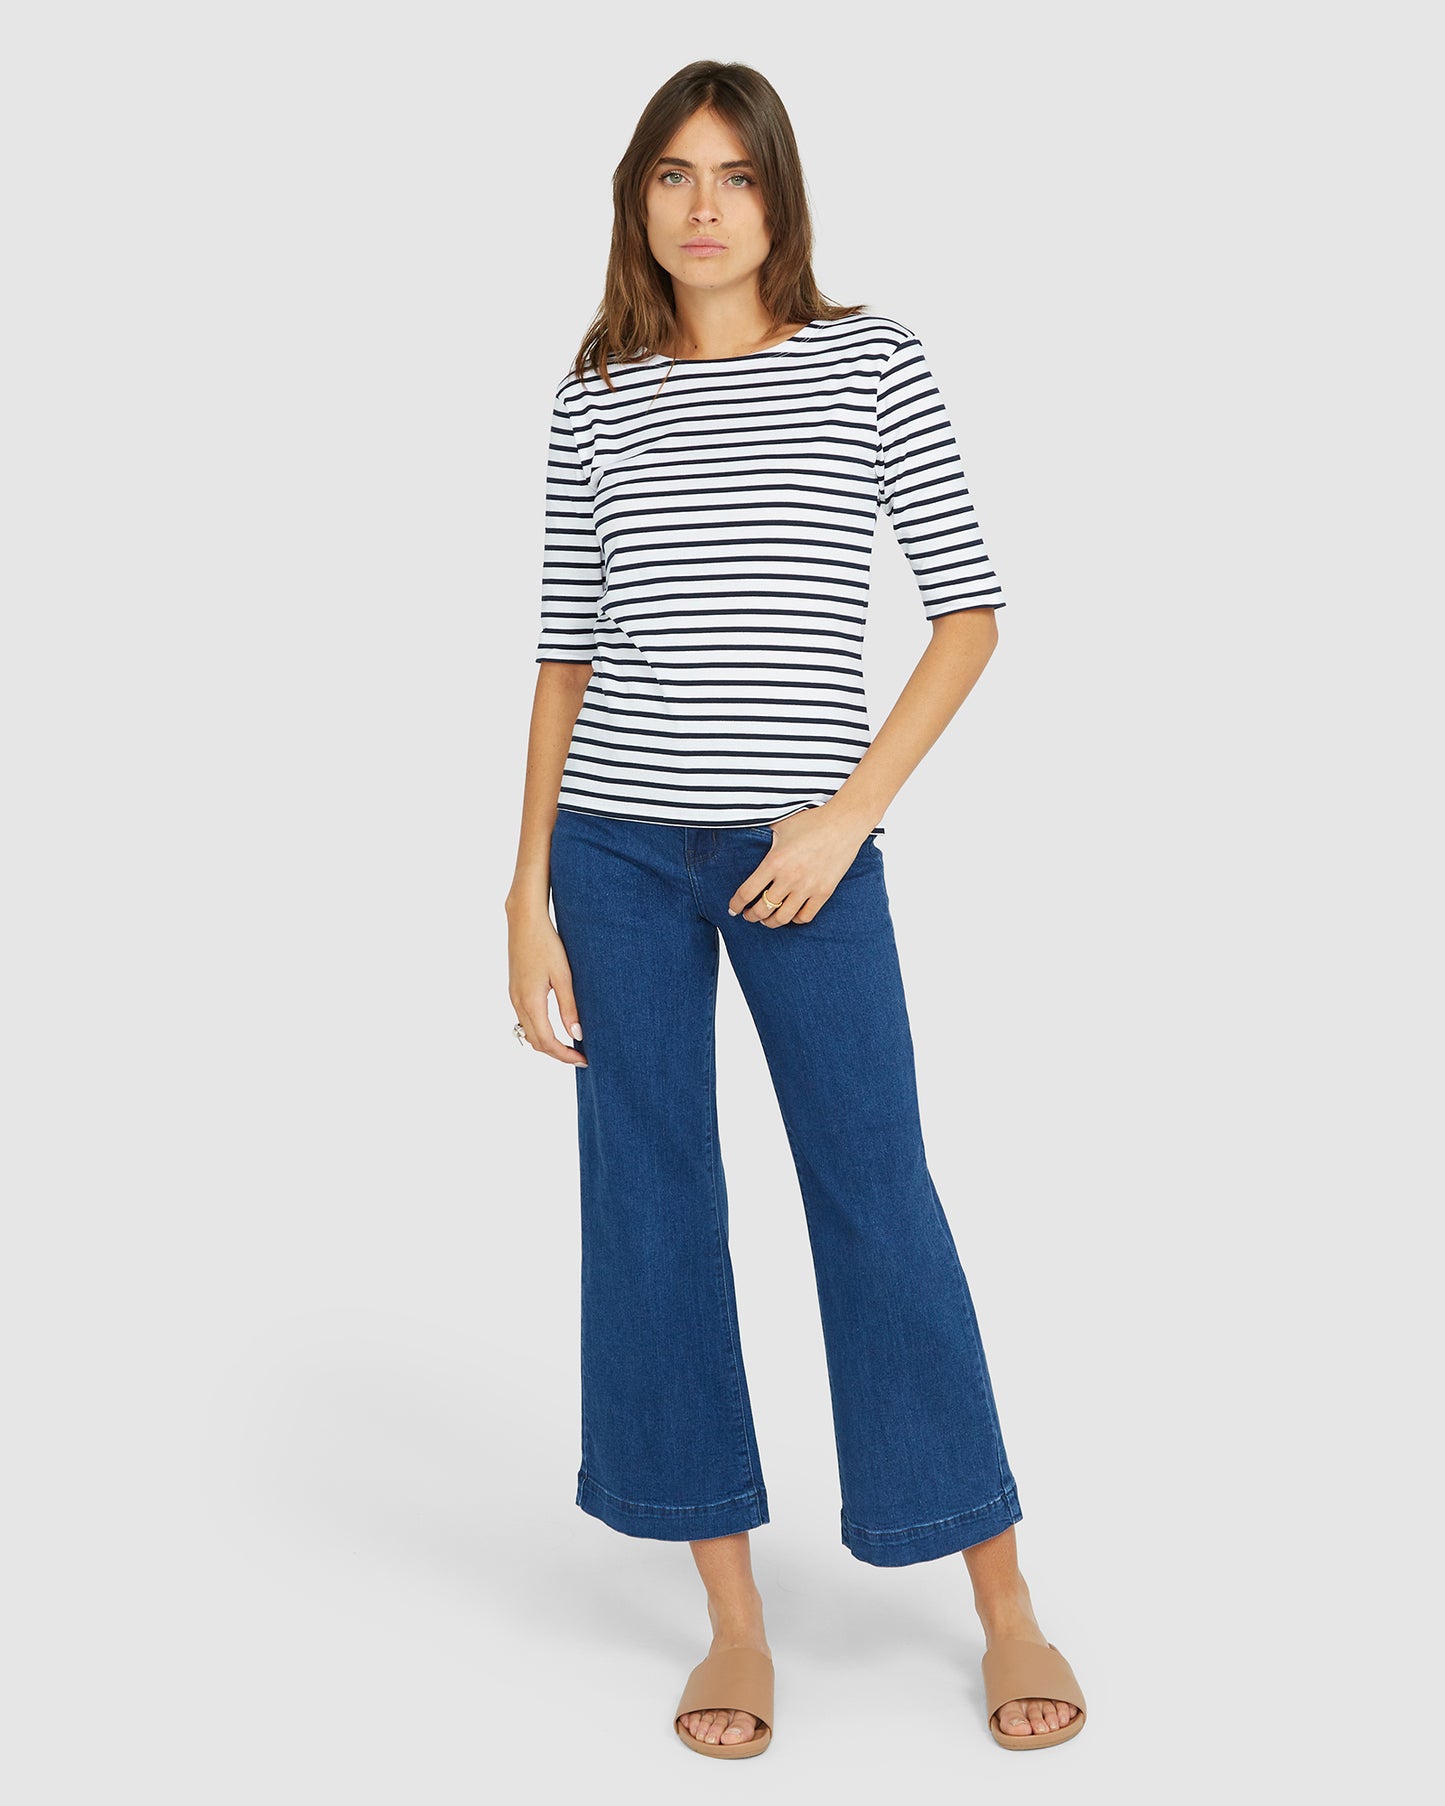 Load image into Gallery viewer, La Bouvier Navy Stripe French Tee - Boat Neck neck
